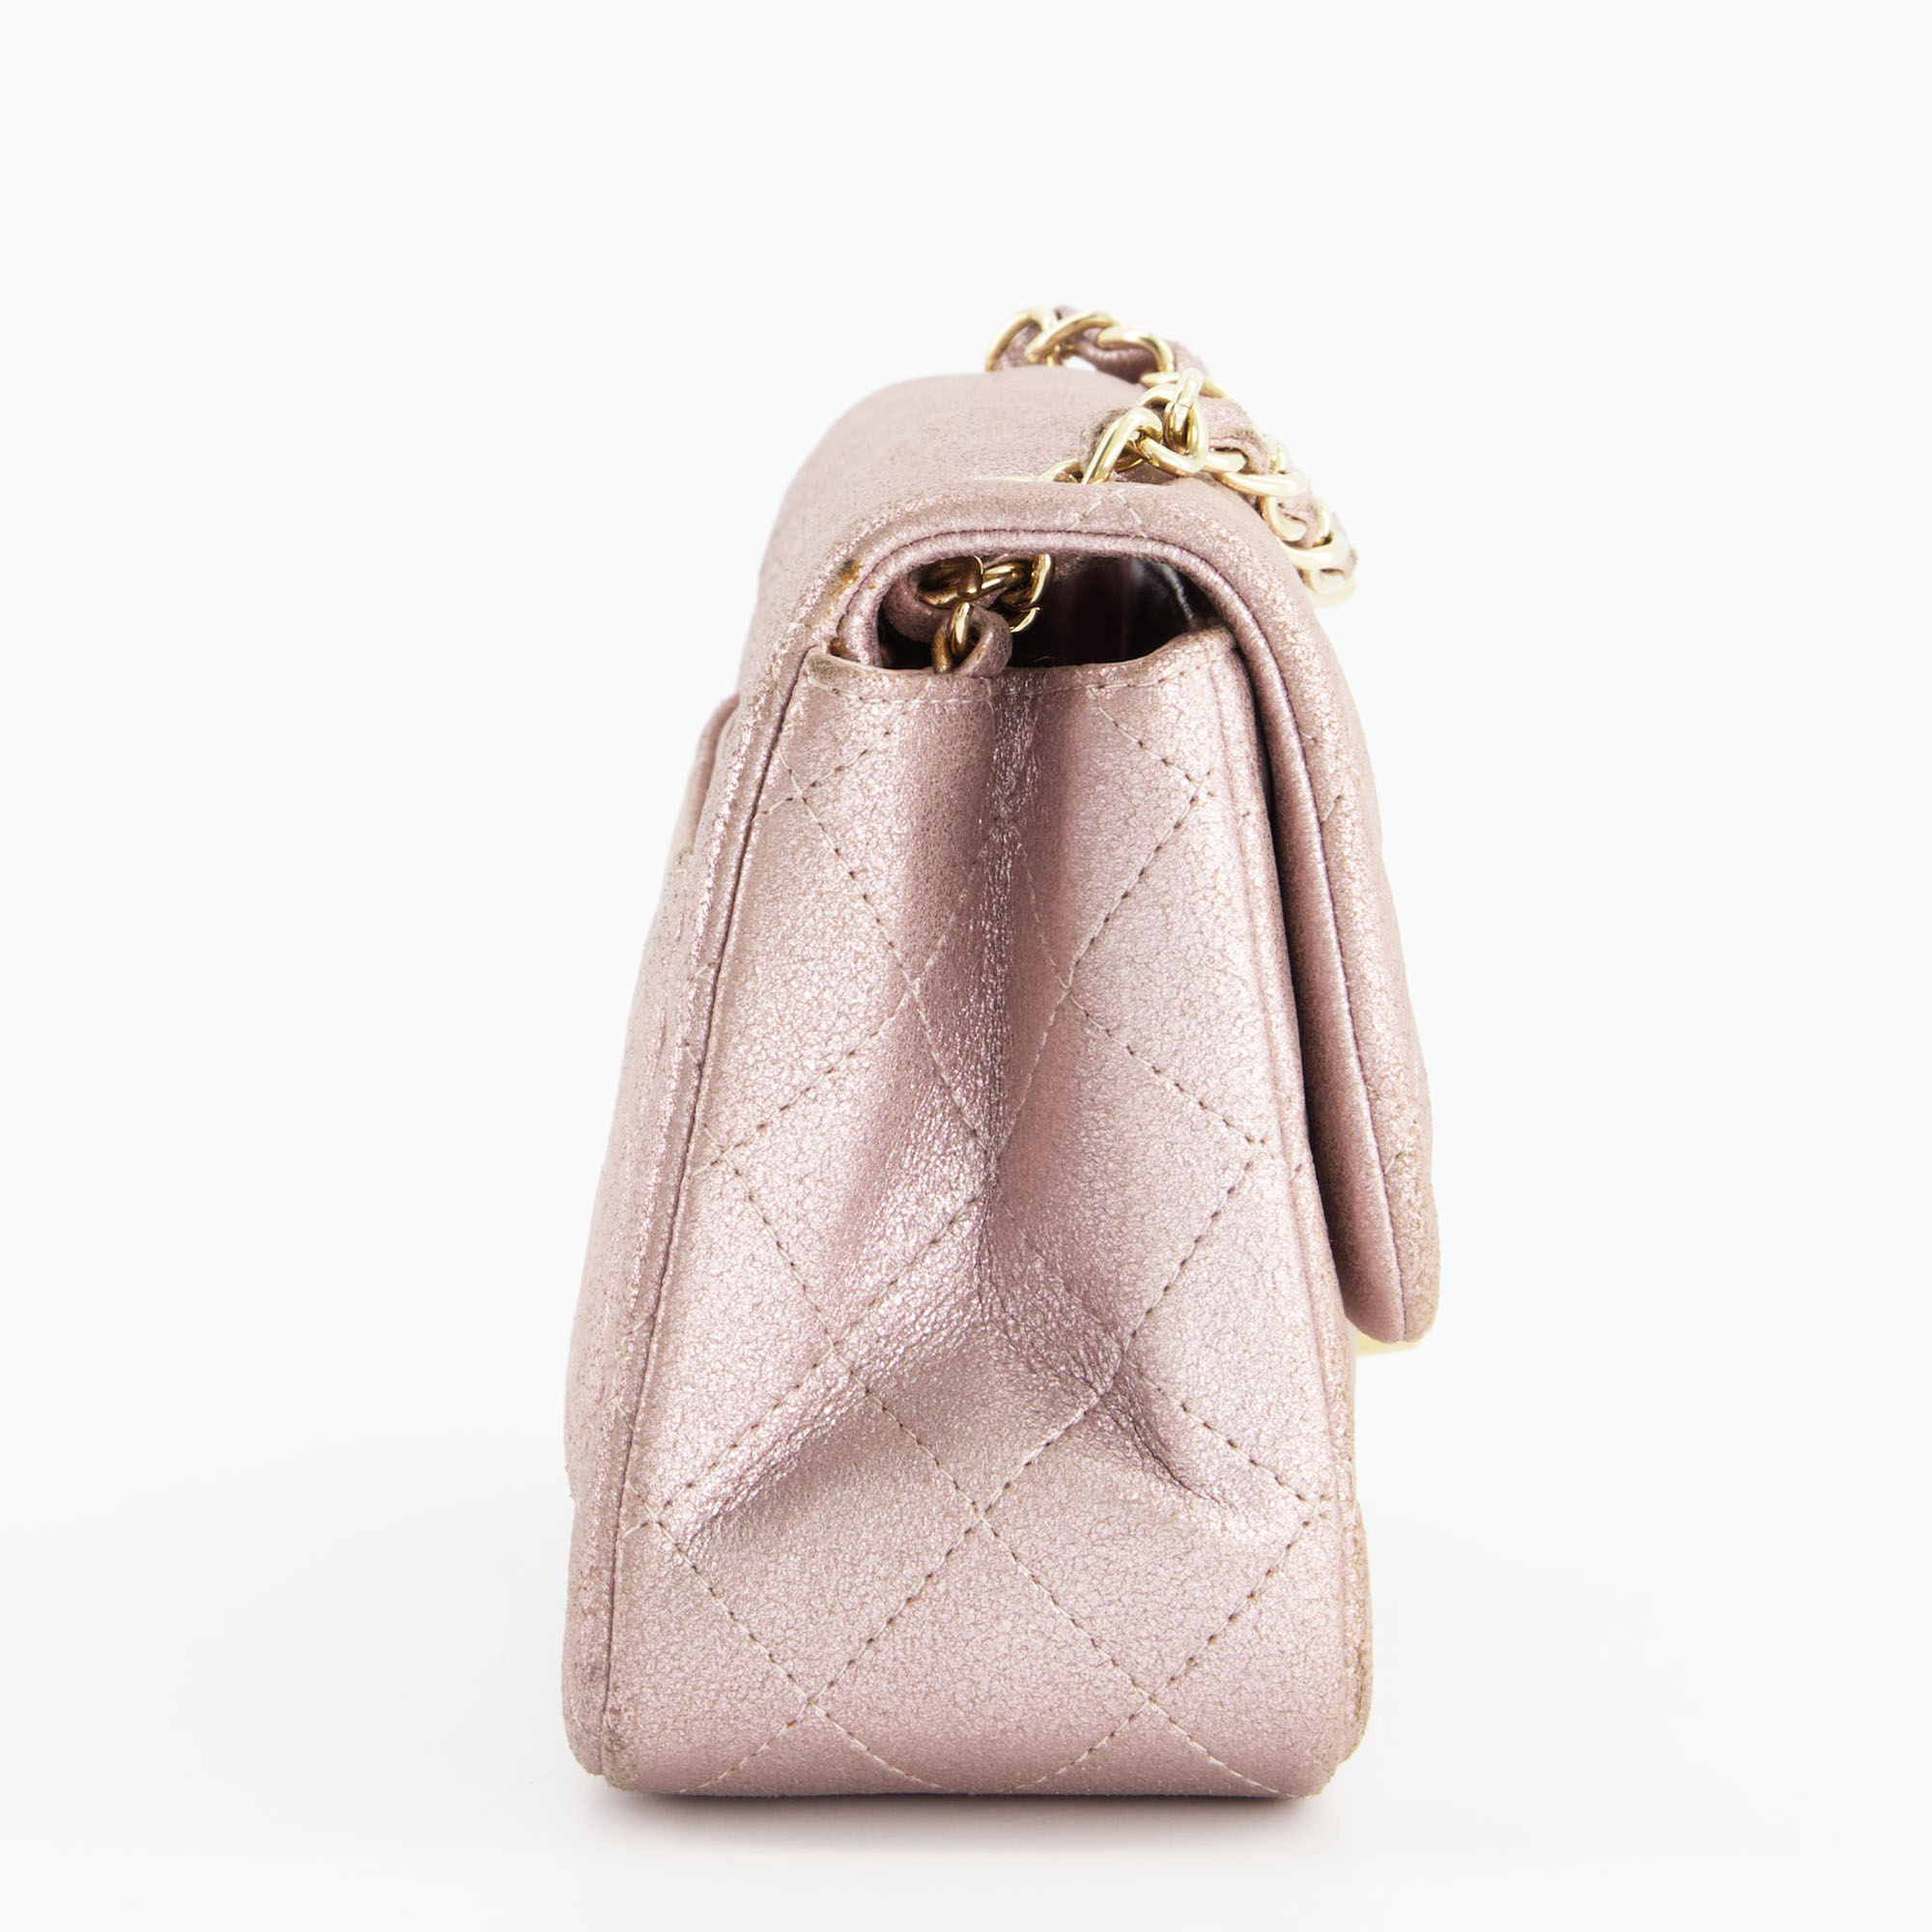 Chanel Metallic Rose Gold Mini Square Flap Bag In Coated Calfskin With Champagne Gold Hardware